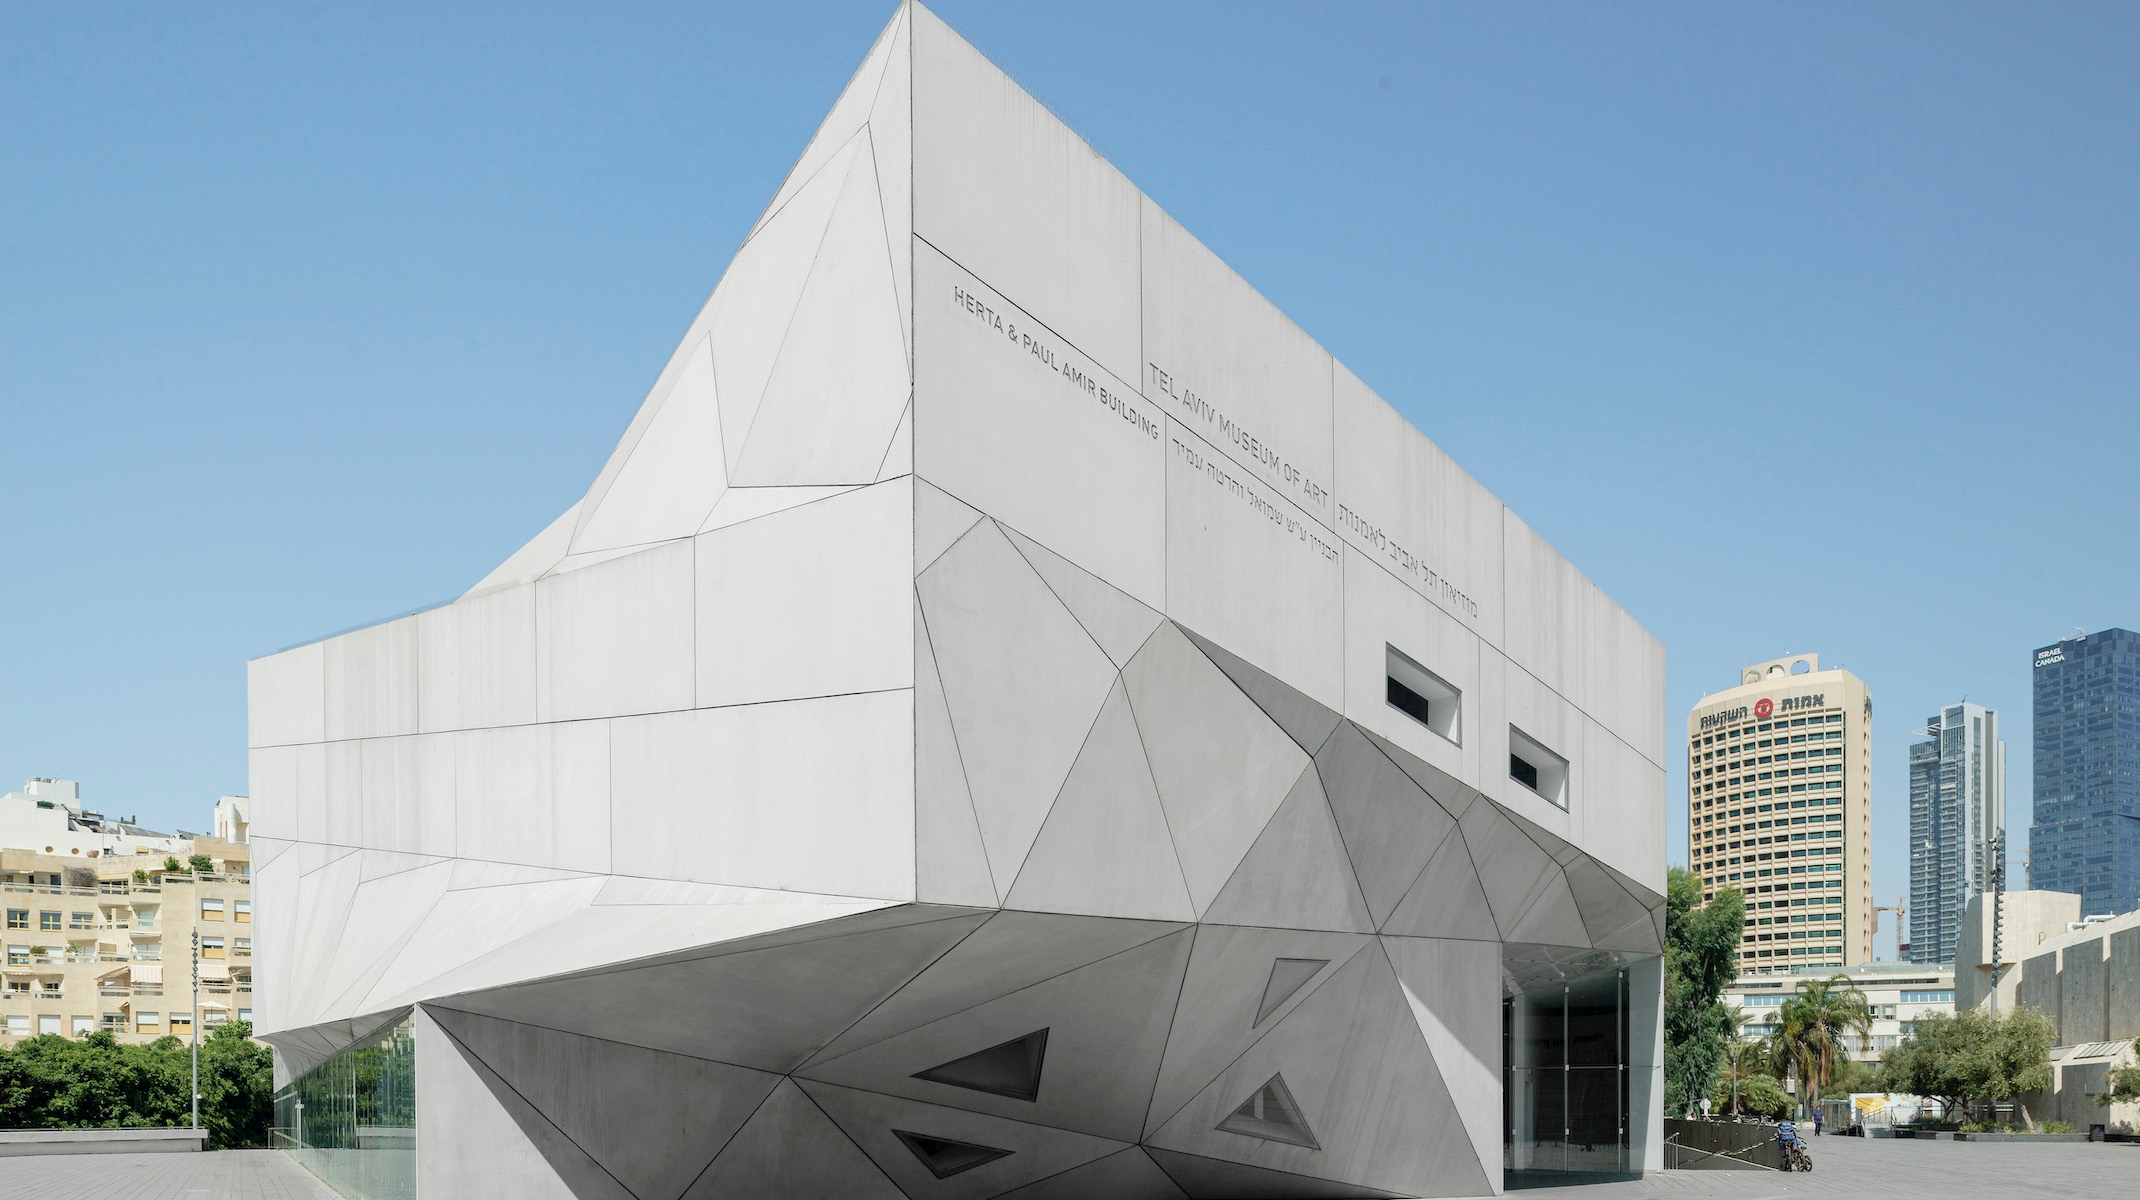 The museum building has a white, Origami-like design and contemporary architectural style.